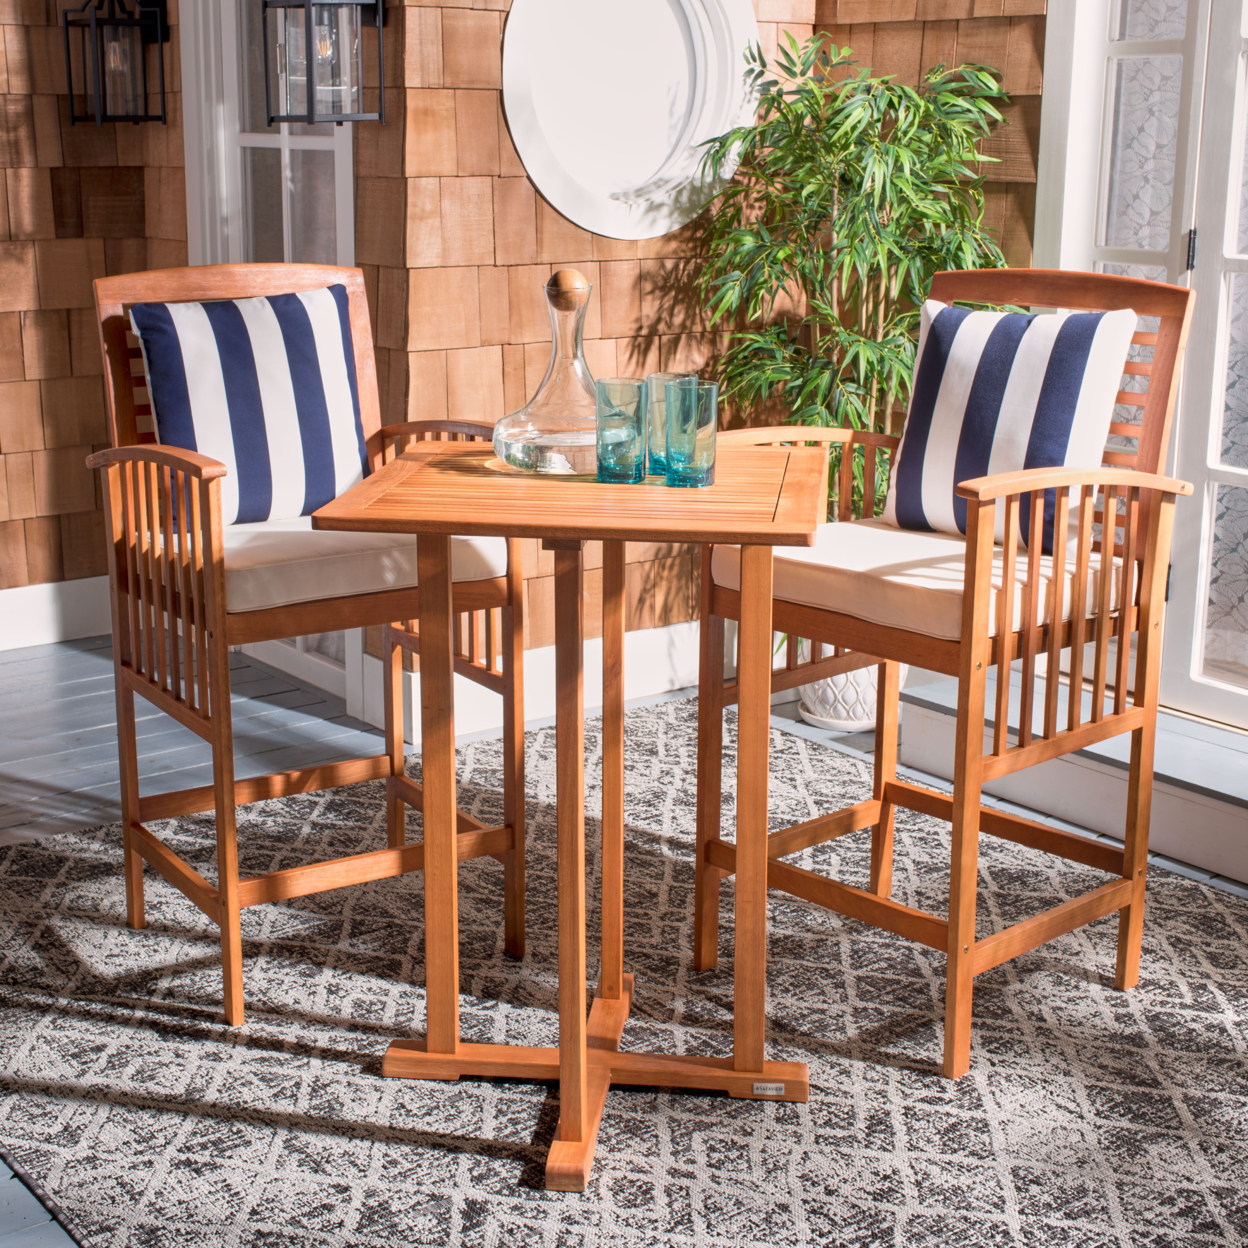 SAFAVIEH Outdoor Collection Pate 3-Piece Bar Table Bistro Set Natural/Beige/Navy/White